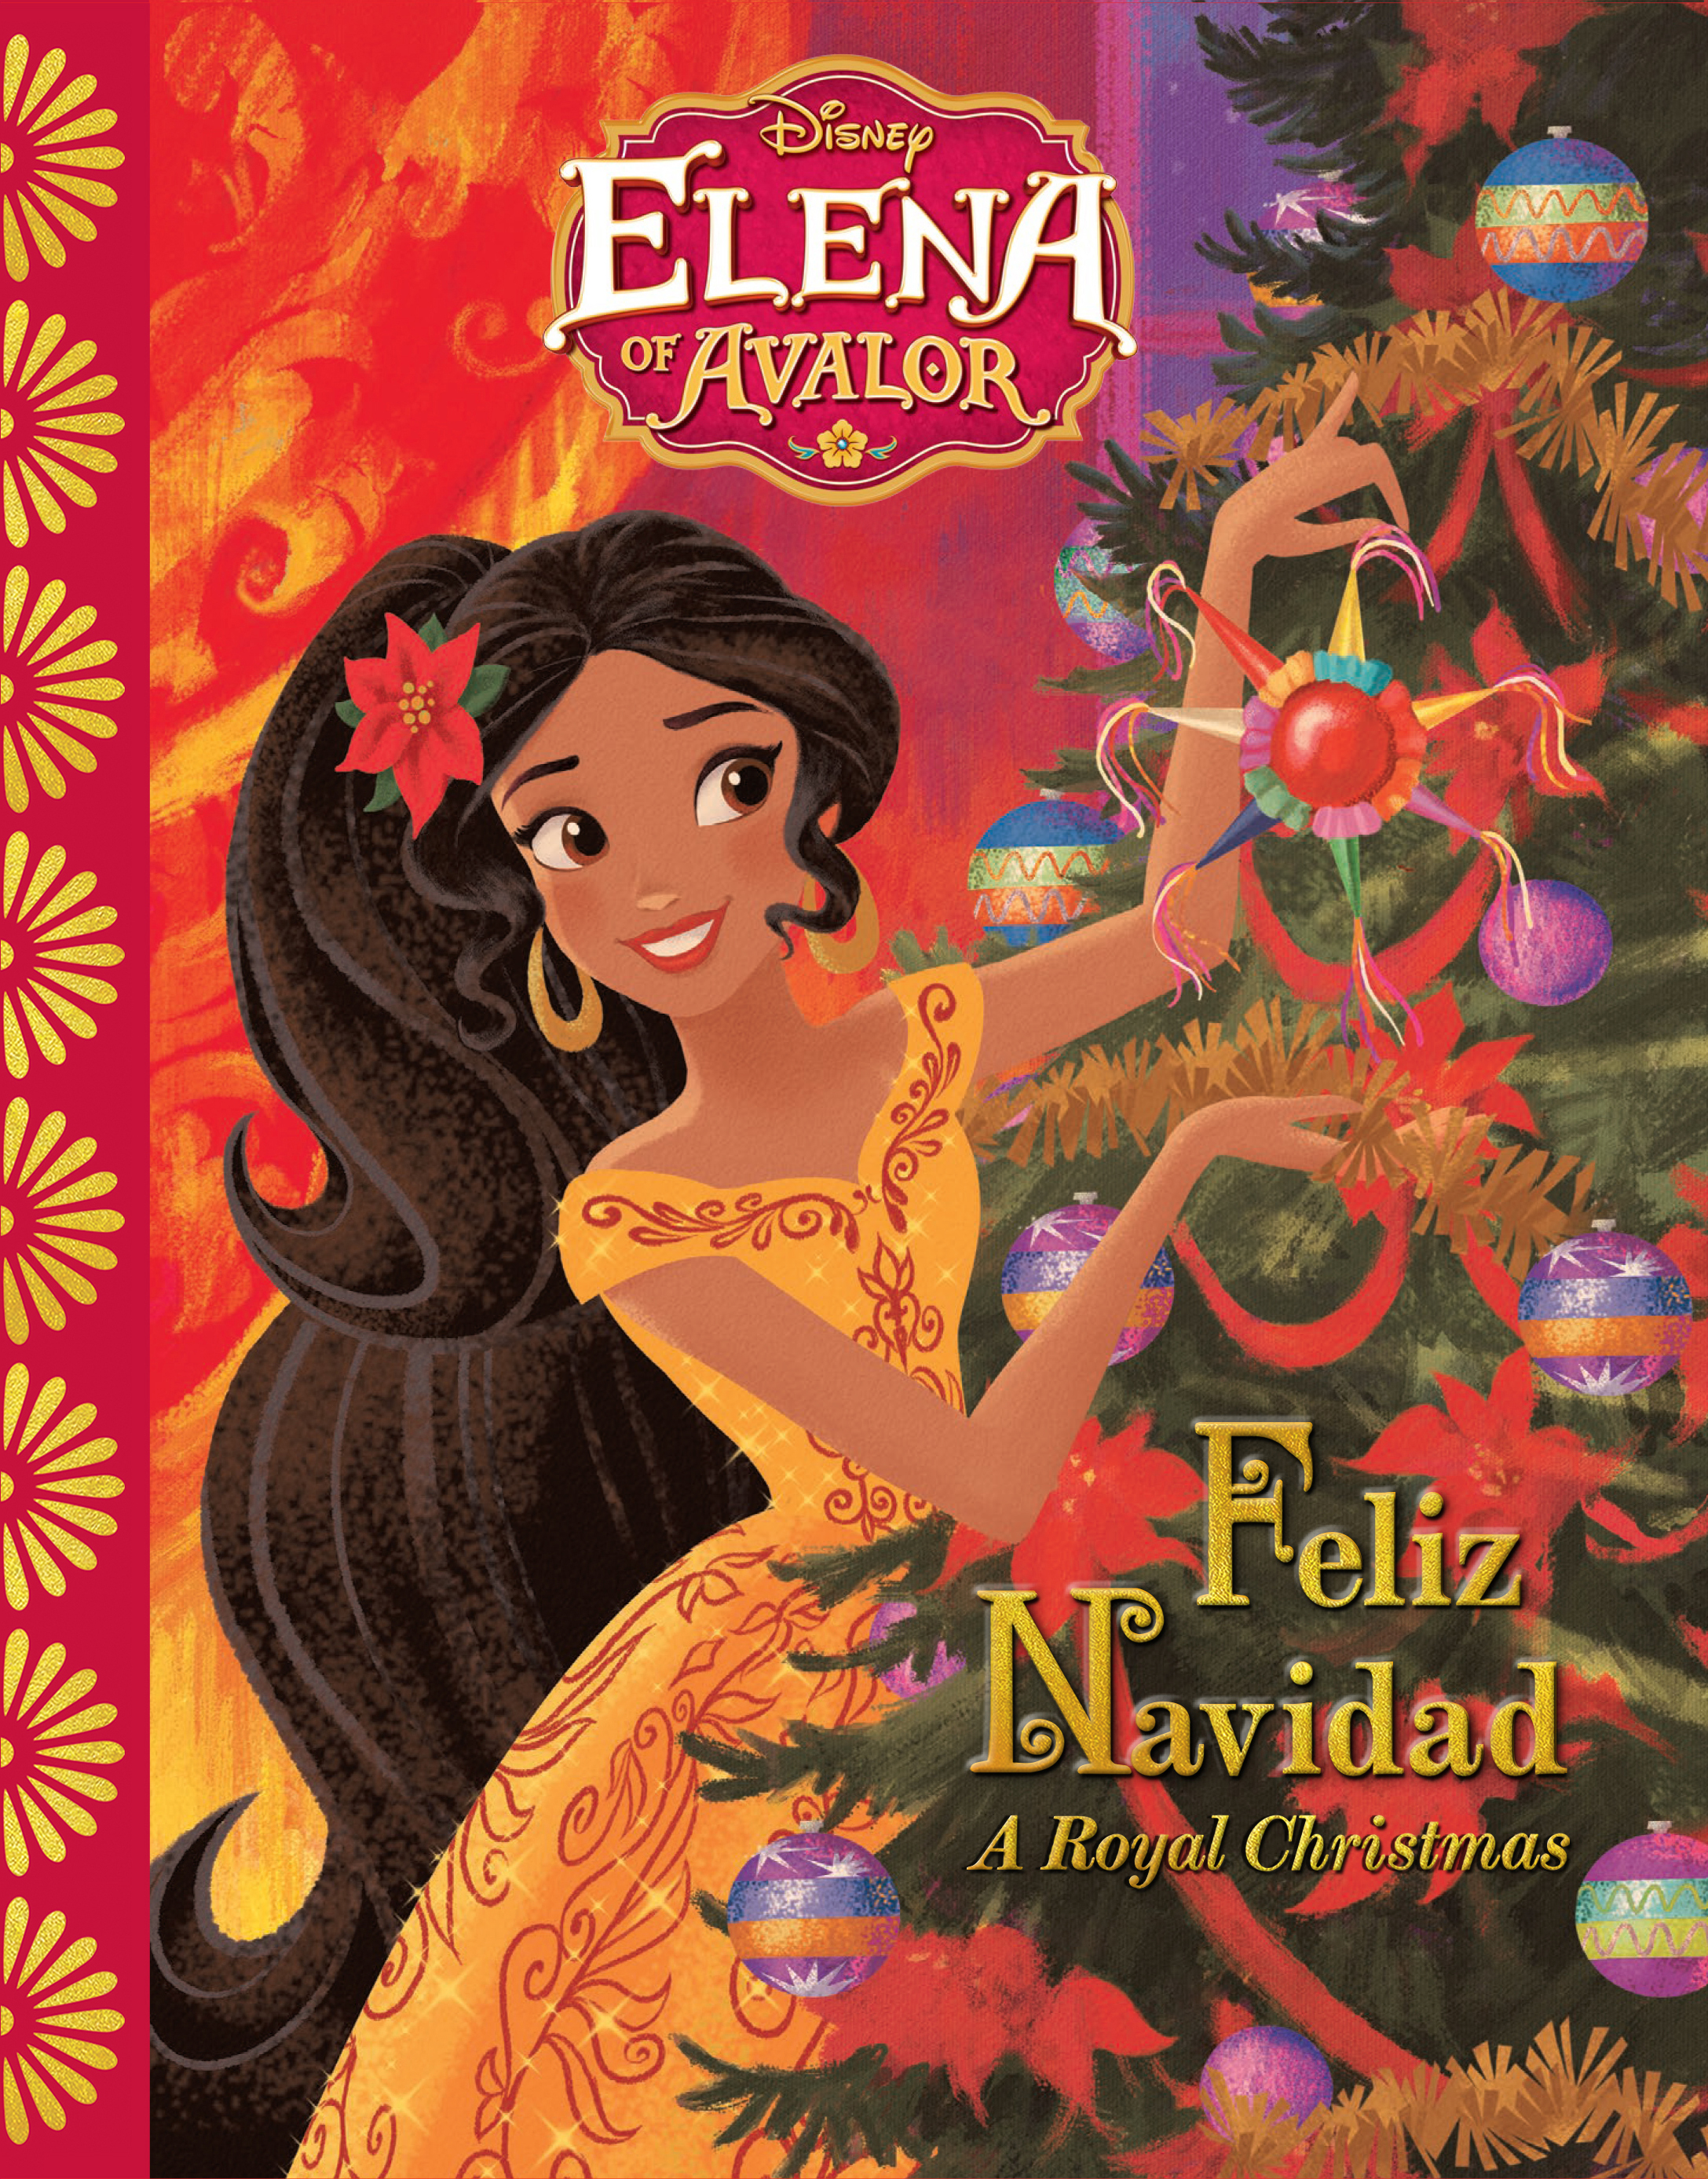 Be holiday ready with Elena: Gift ideas fit for a princess - Prize Pack Giveaway!